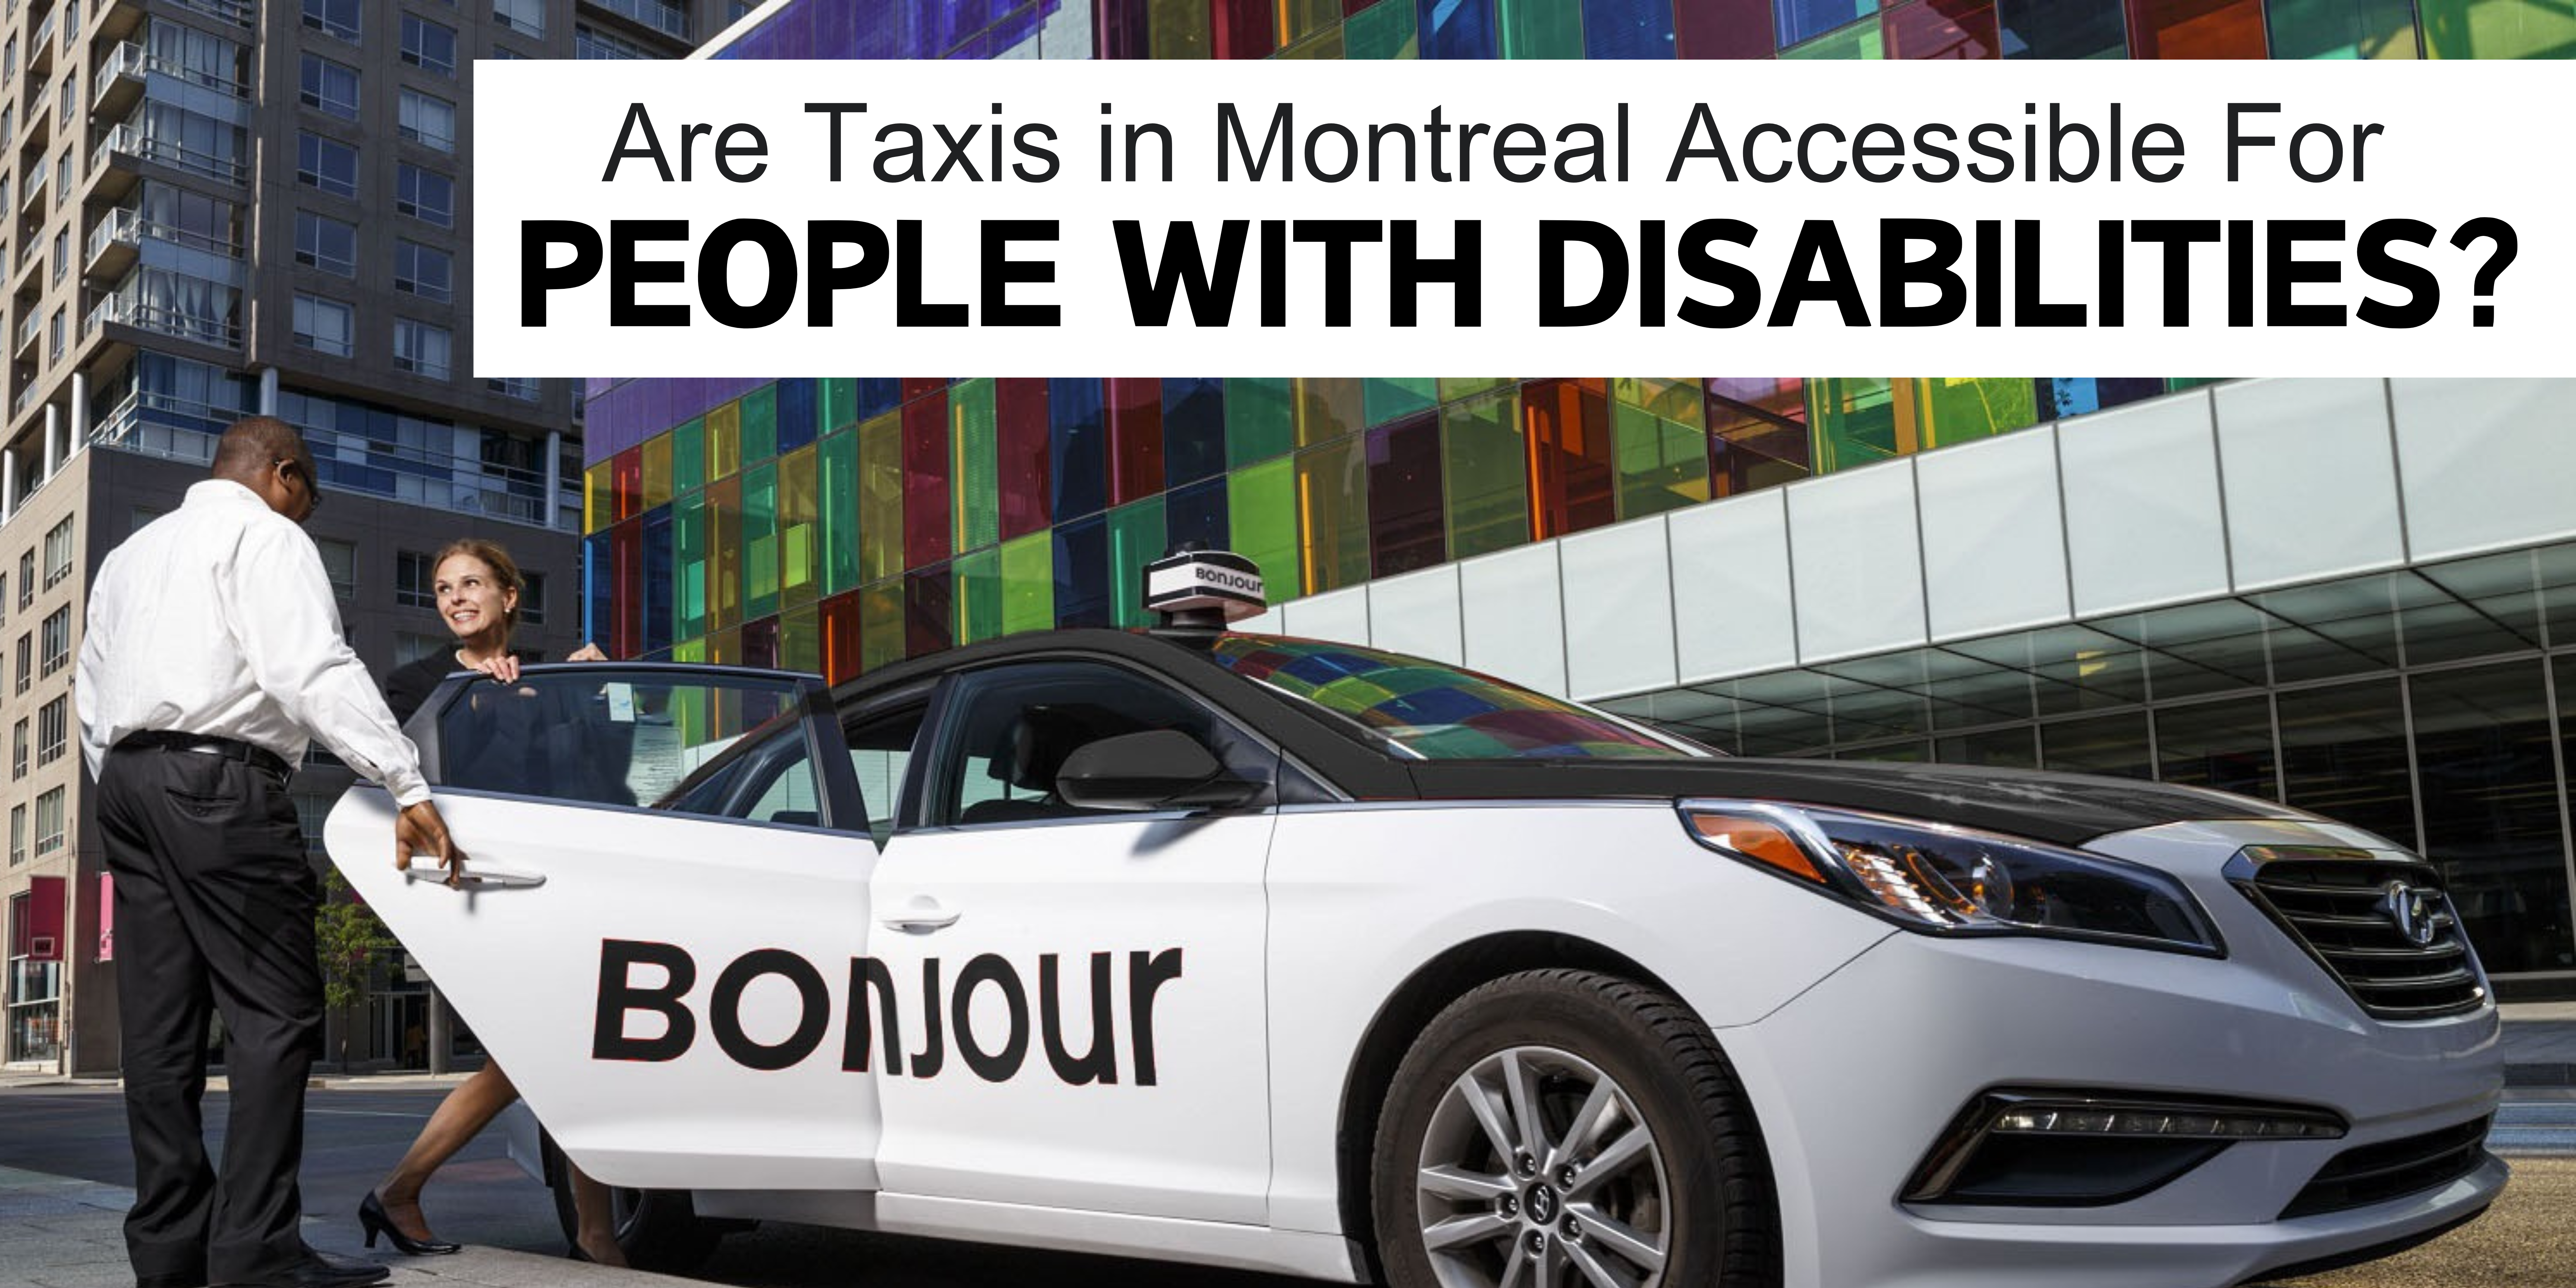 Taxis in Montreal for People with Disabilities